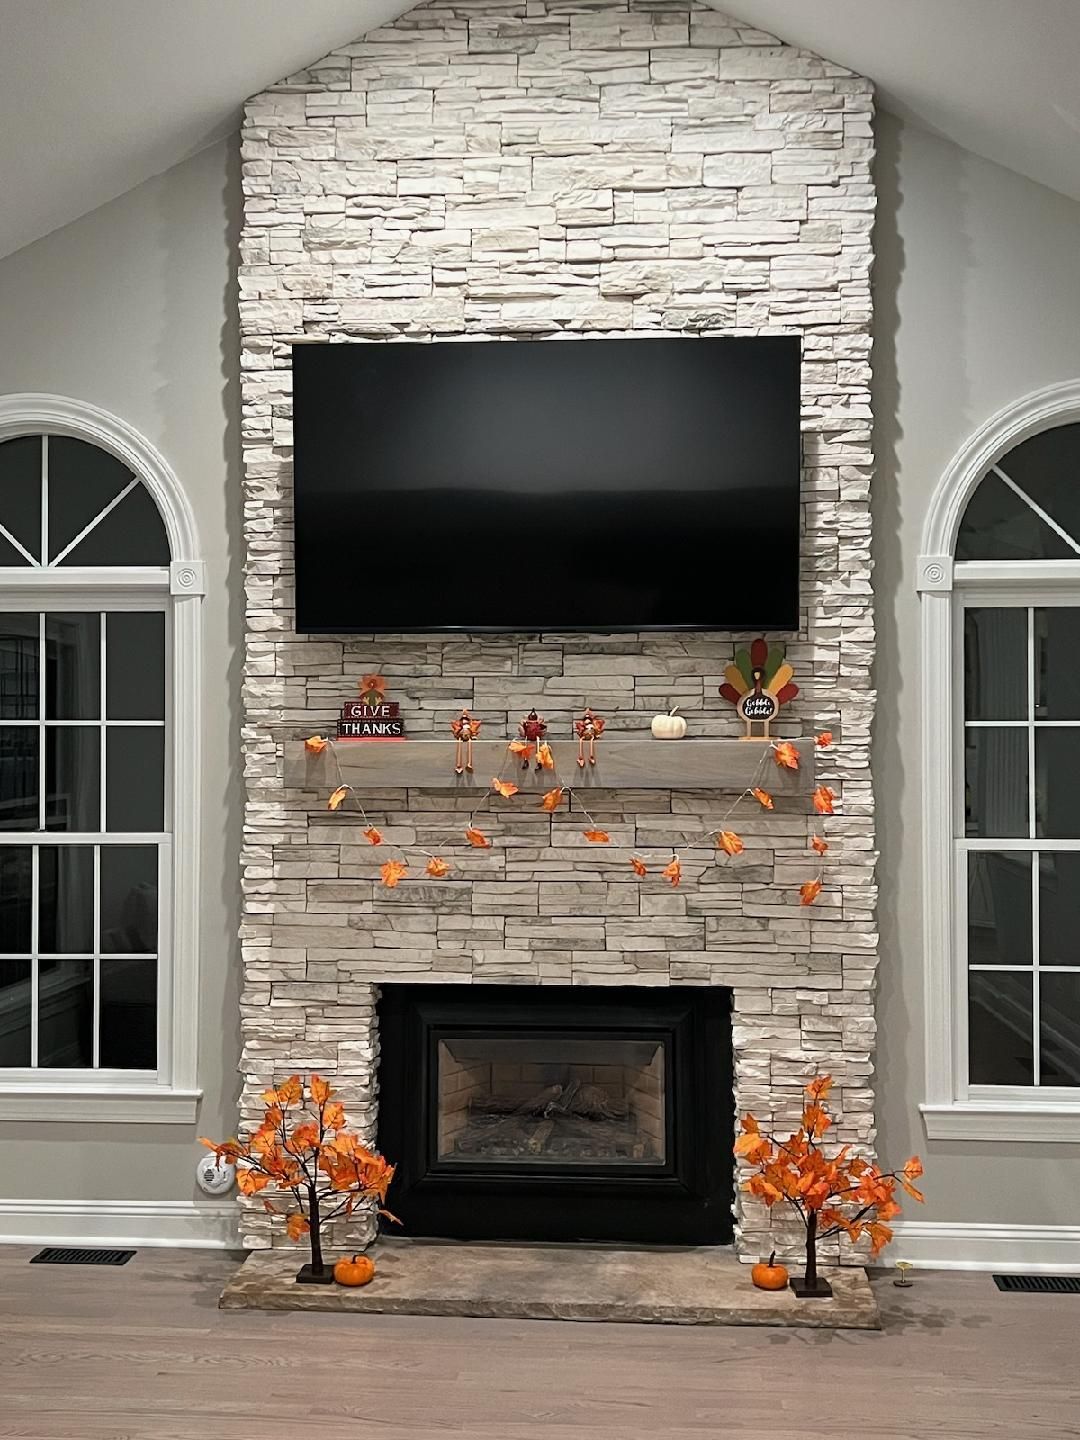 Stone Work — Modern Fireplace With Brick Wall in Lan ghorne, PA